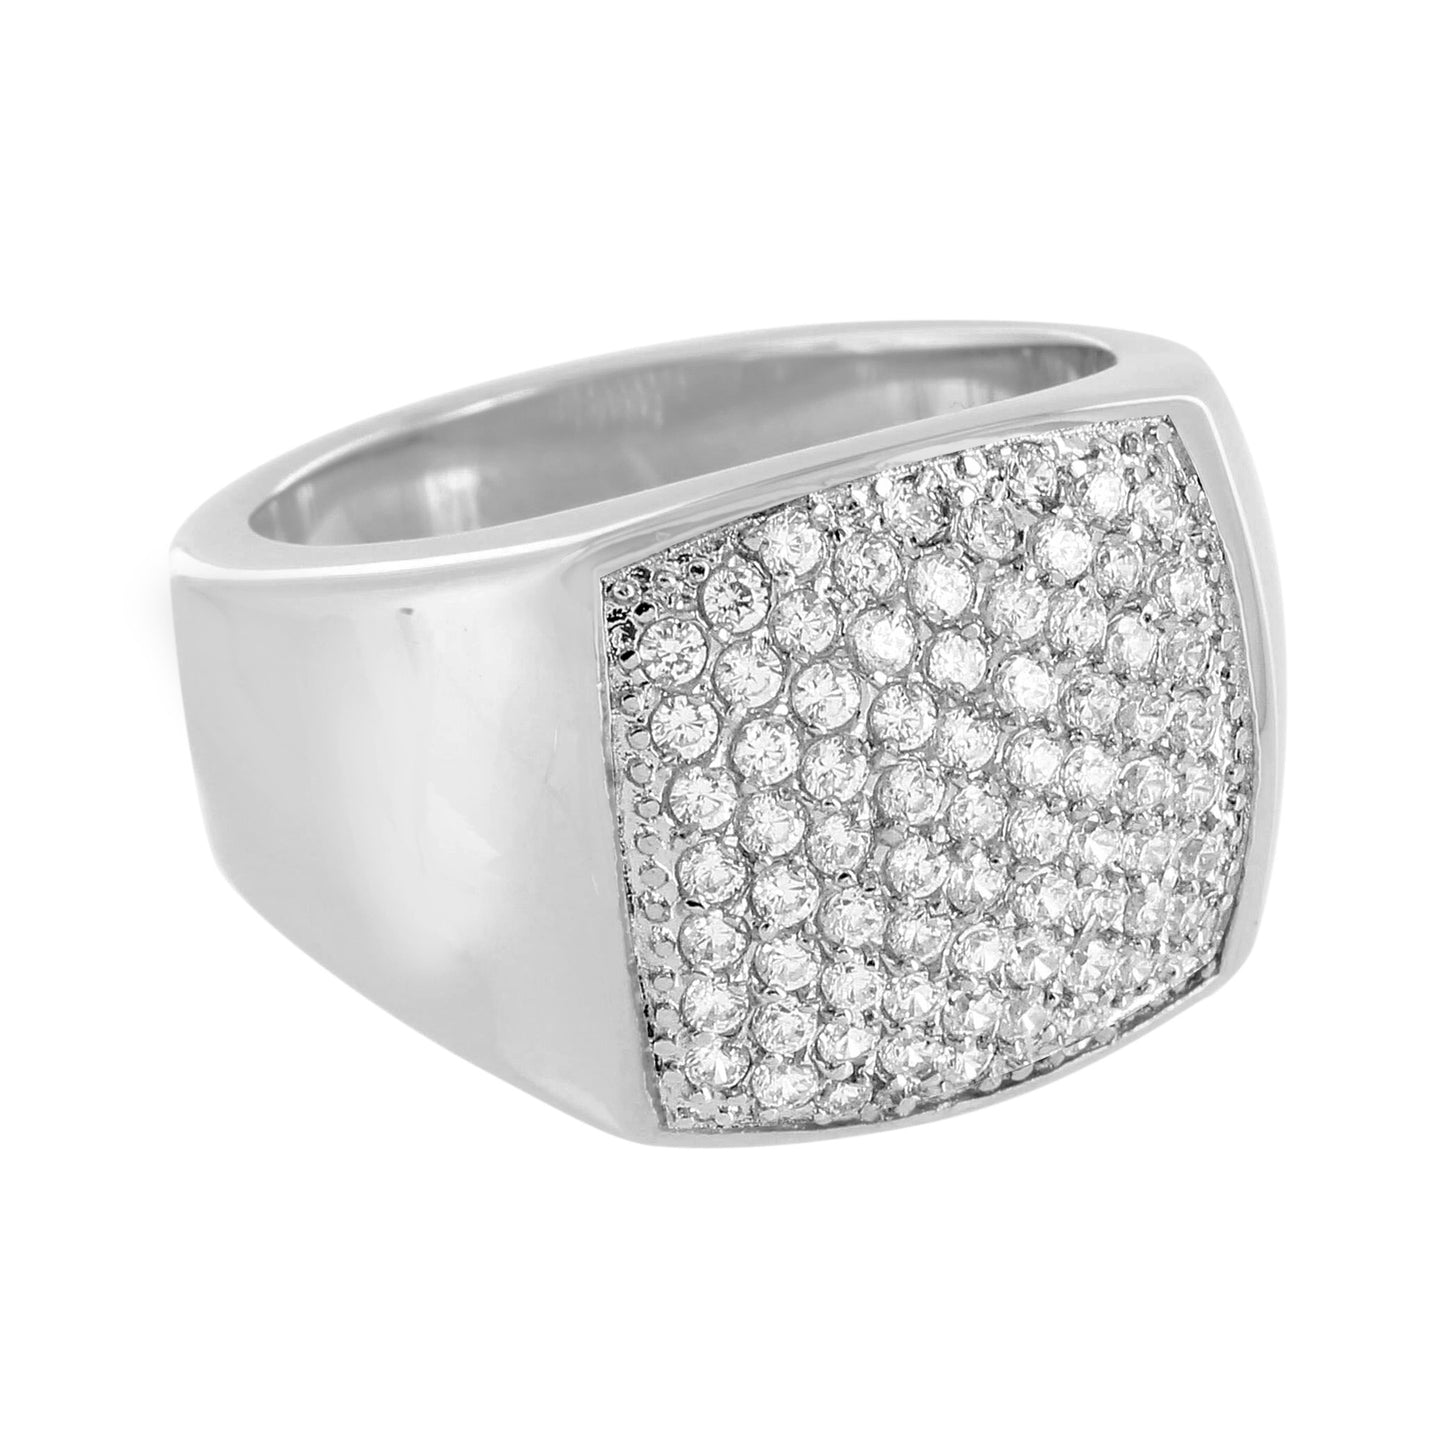 Stainless Steel Mens Ring Simulated Diamonds Micro Pave Wedding Engagement Sale